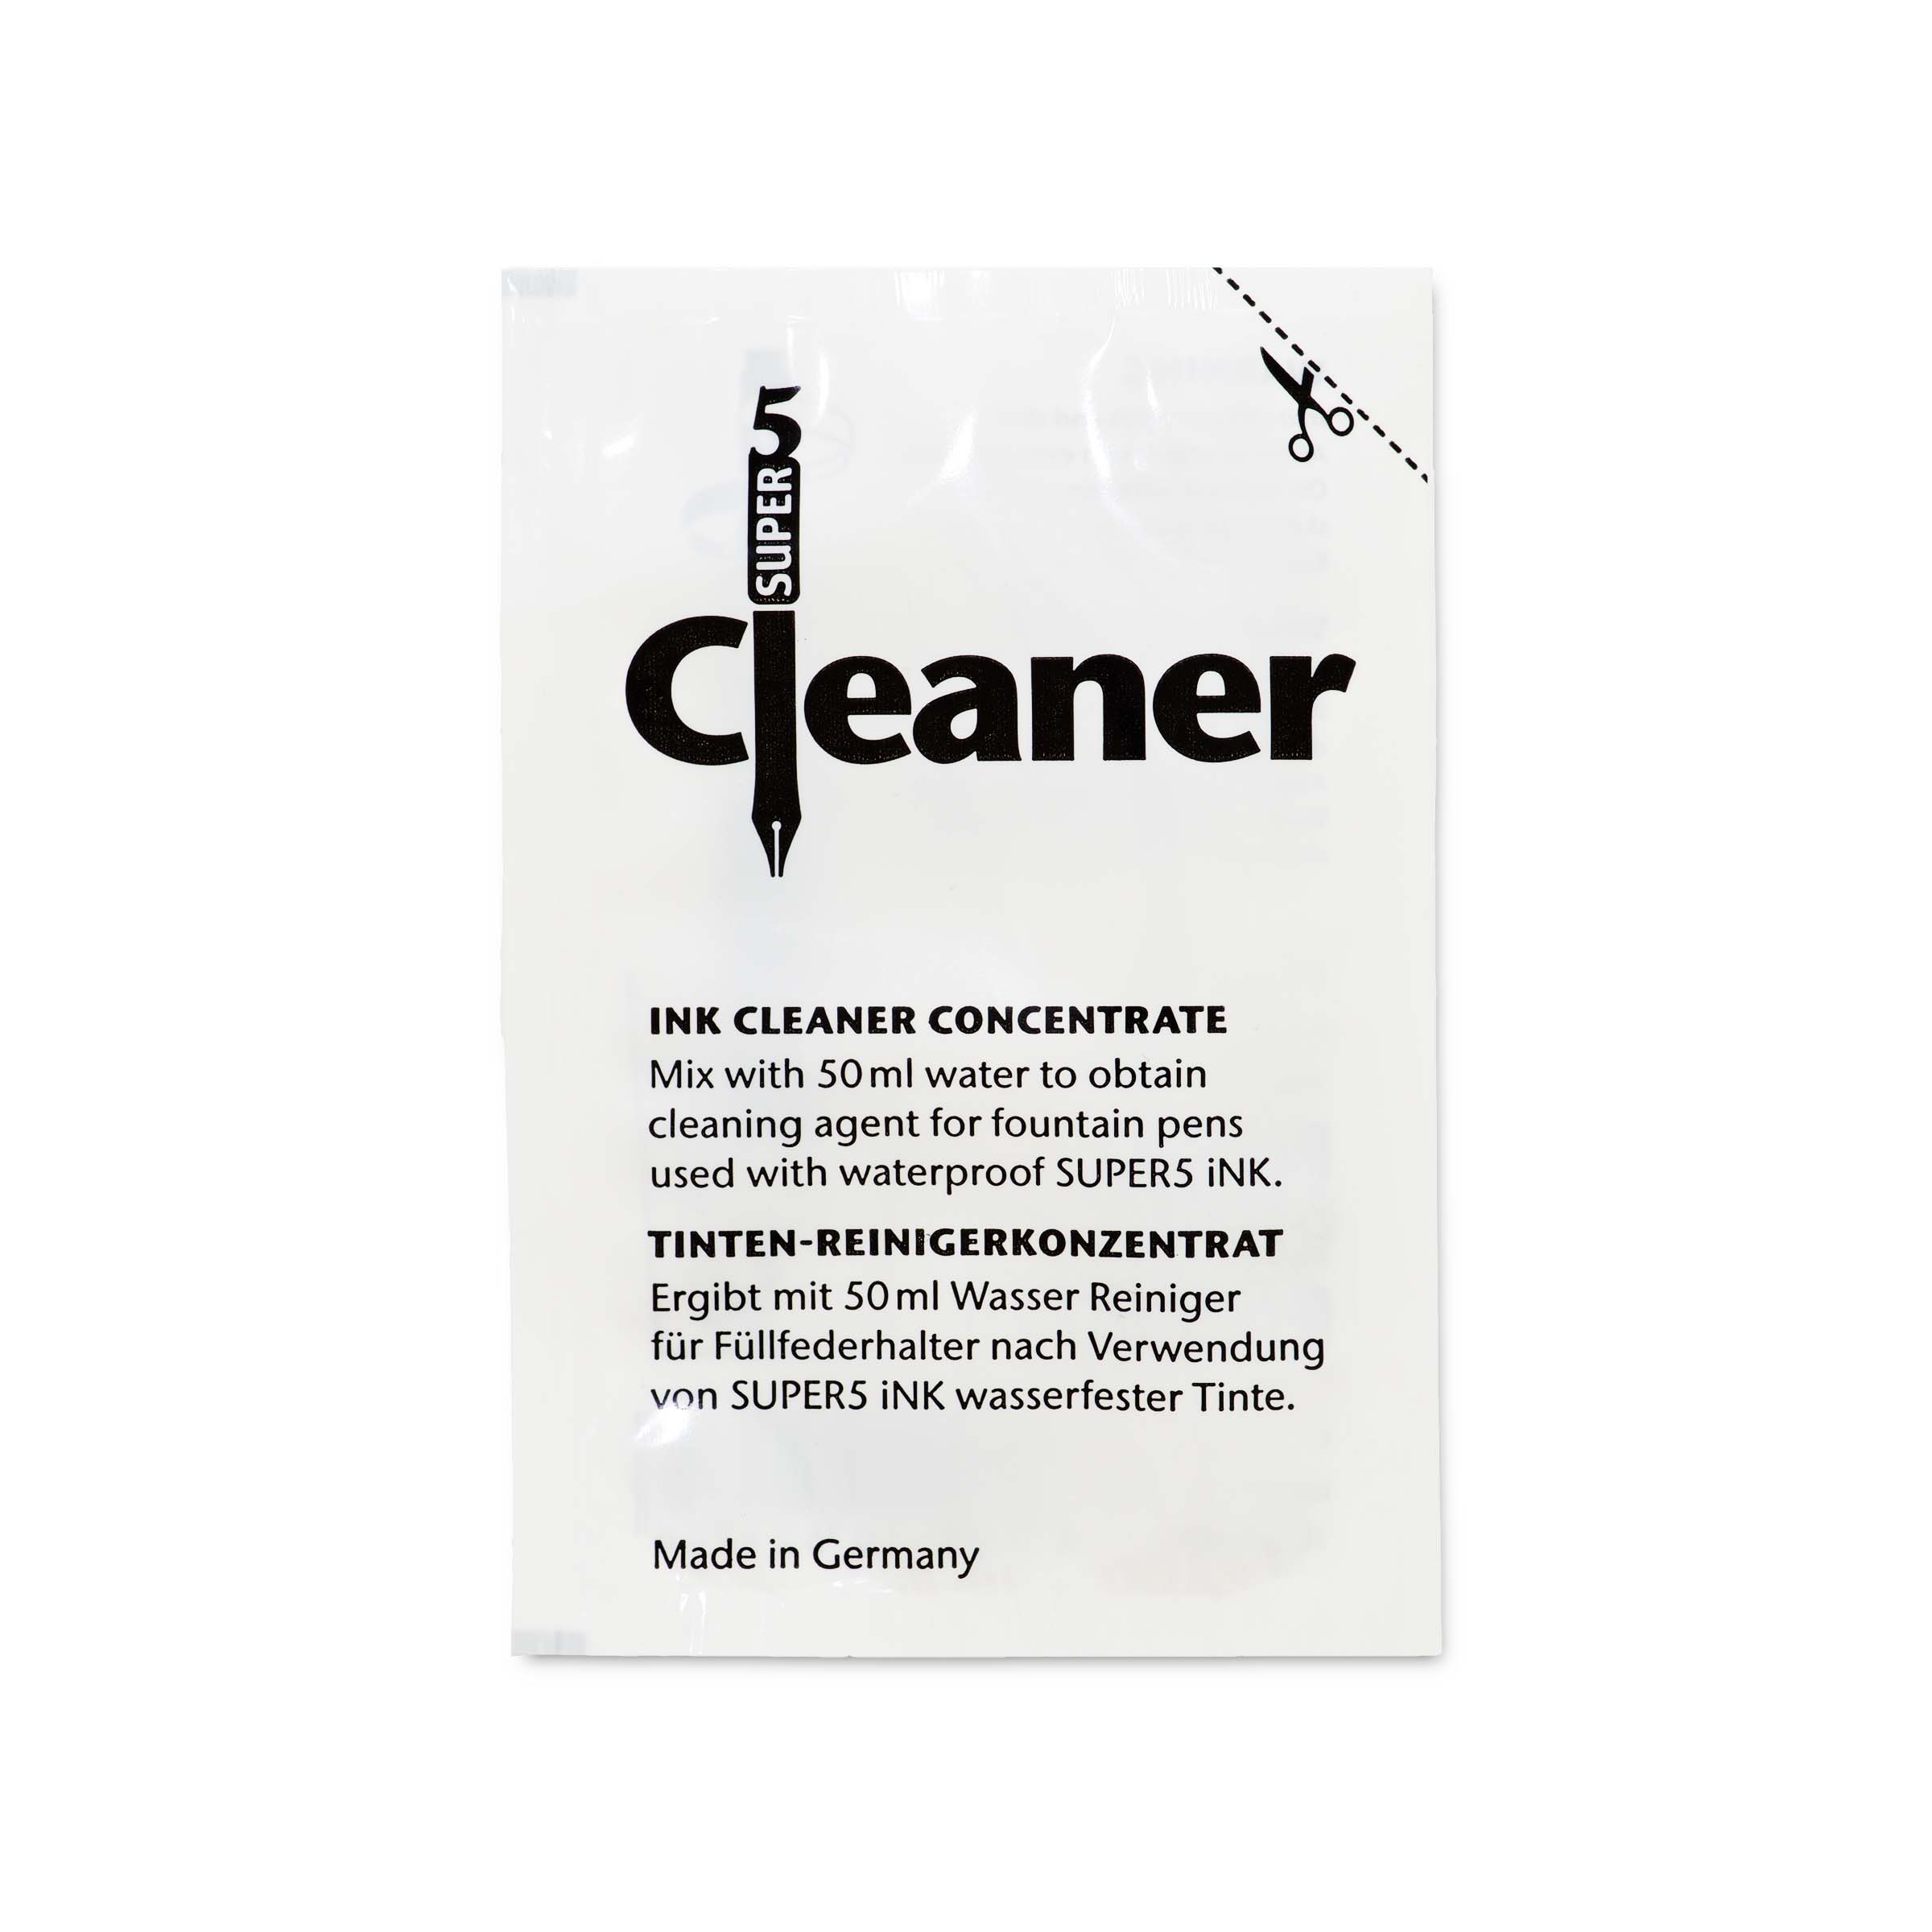 SUPER5 Cleaner <br>Ink Cleaner Concentrate <br>for Fountain Pens